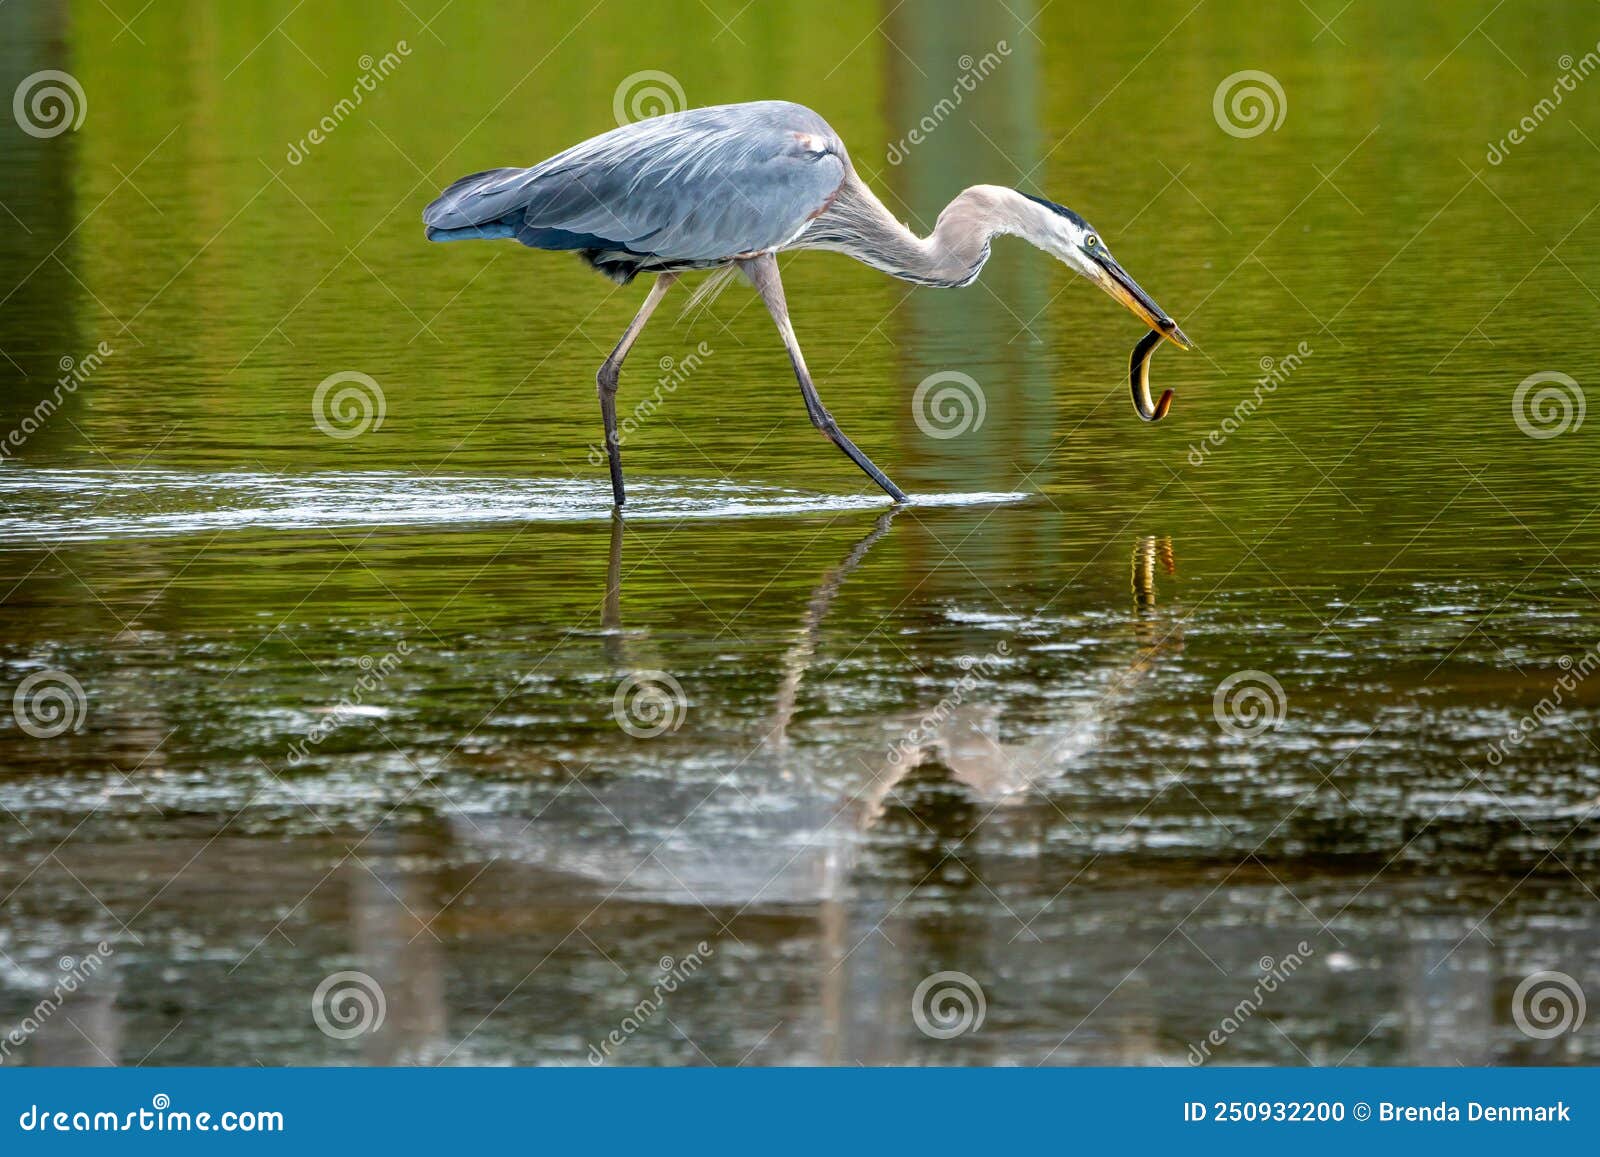 Great Blue Heron Eating an Eel in Huntington Beach State Park Stock ...